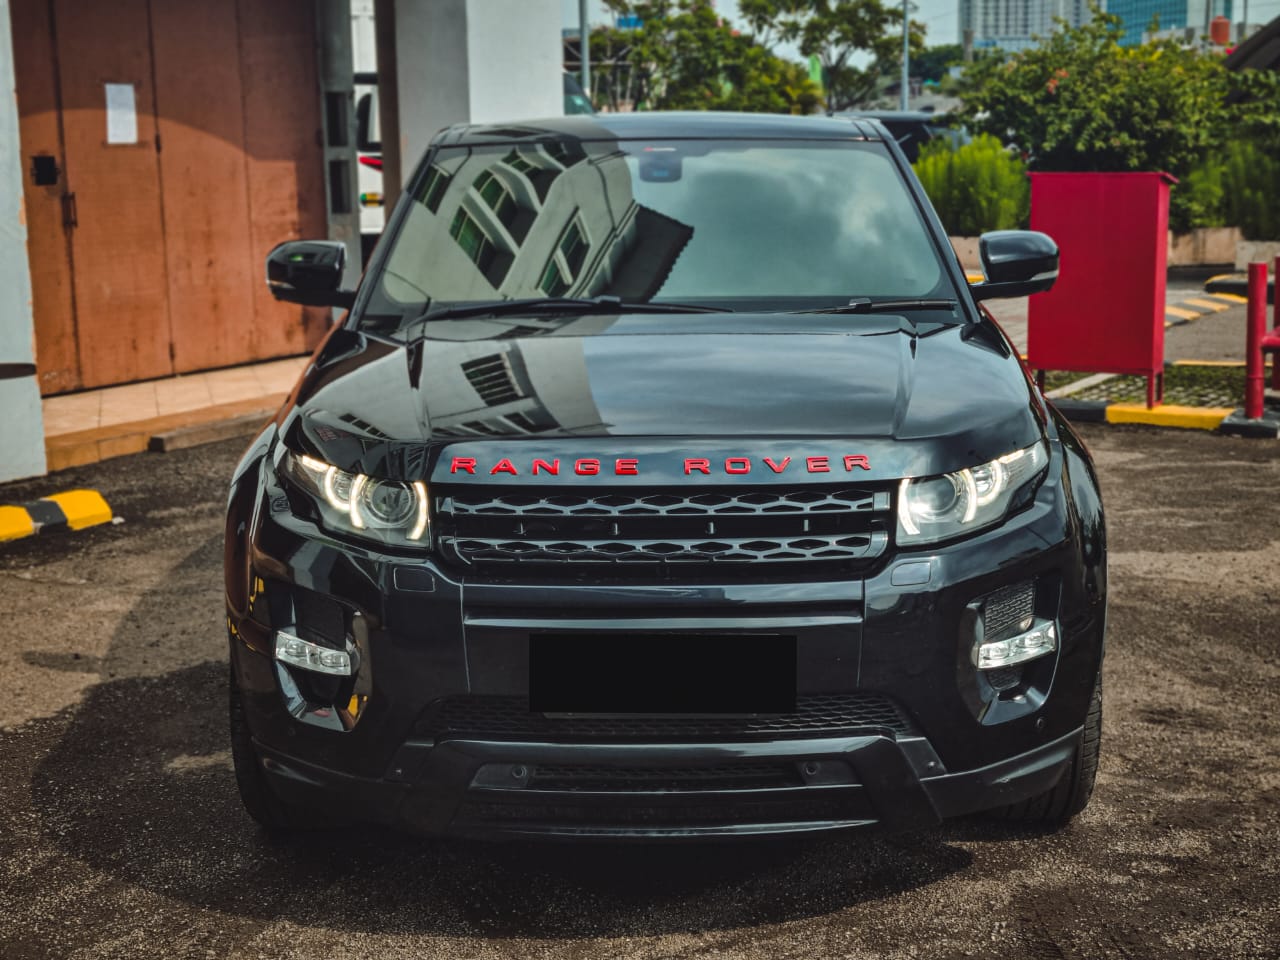 Used 2012 Land Rover Range Rover Evoque SE Dynamic Si4 Petrol 9-Speed Automatic 240PS SE Dynamic Si4 Petrol 9-Speed Automatic 240PS